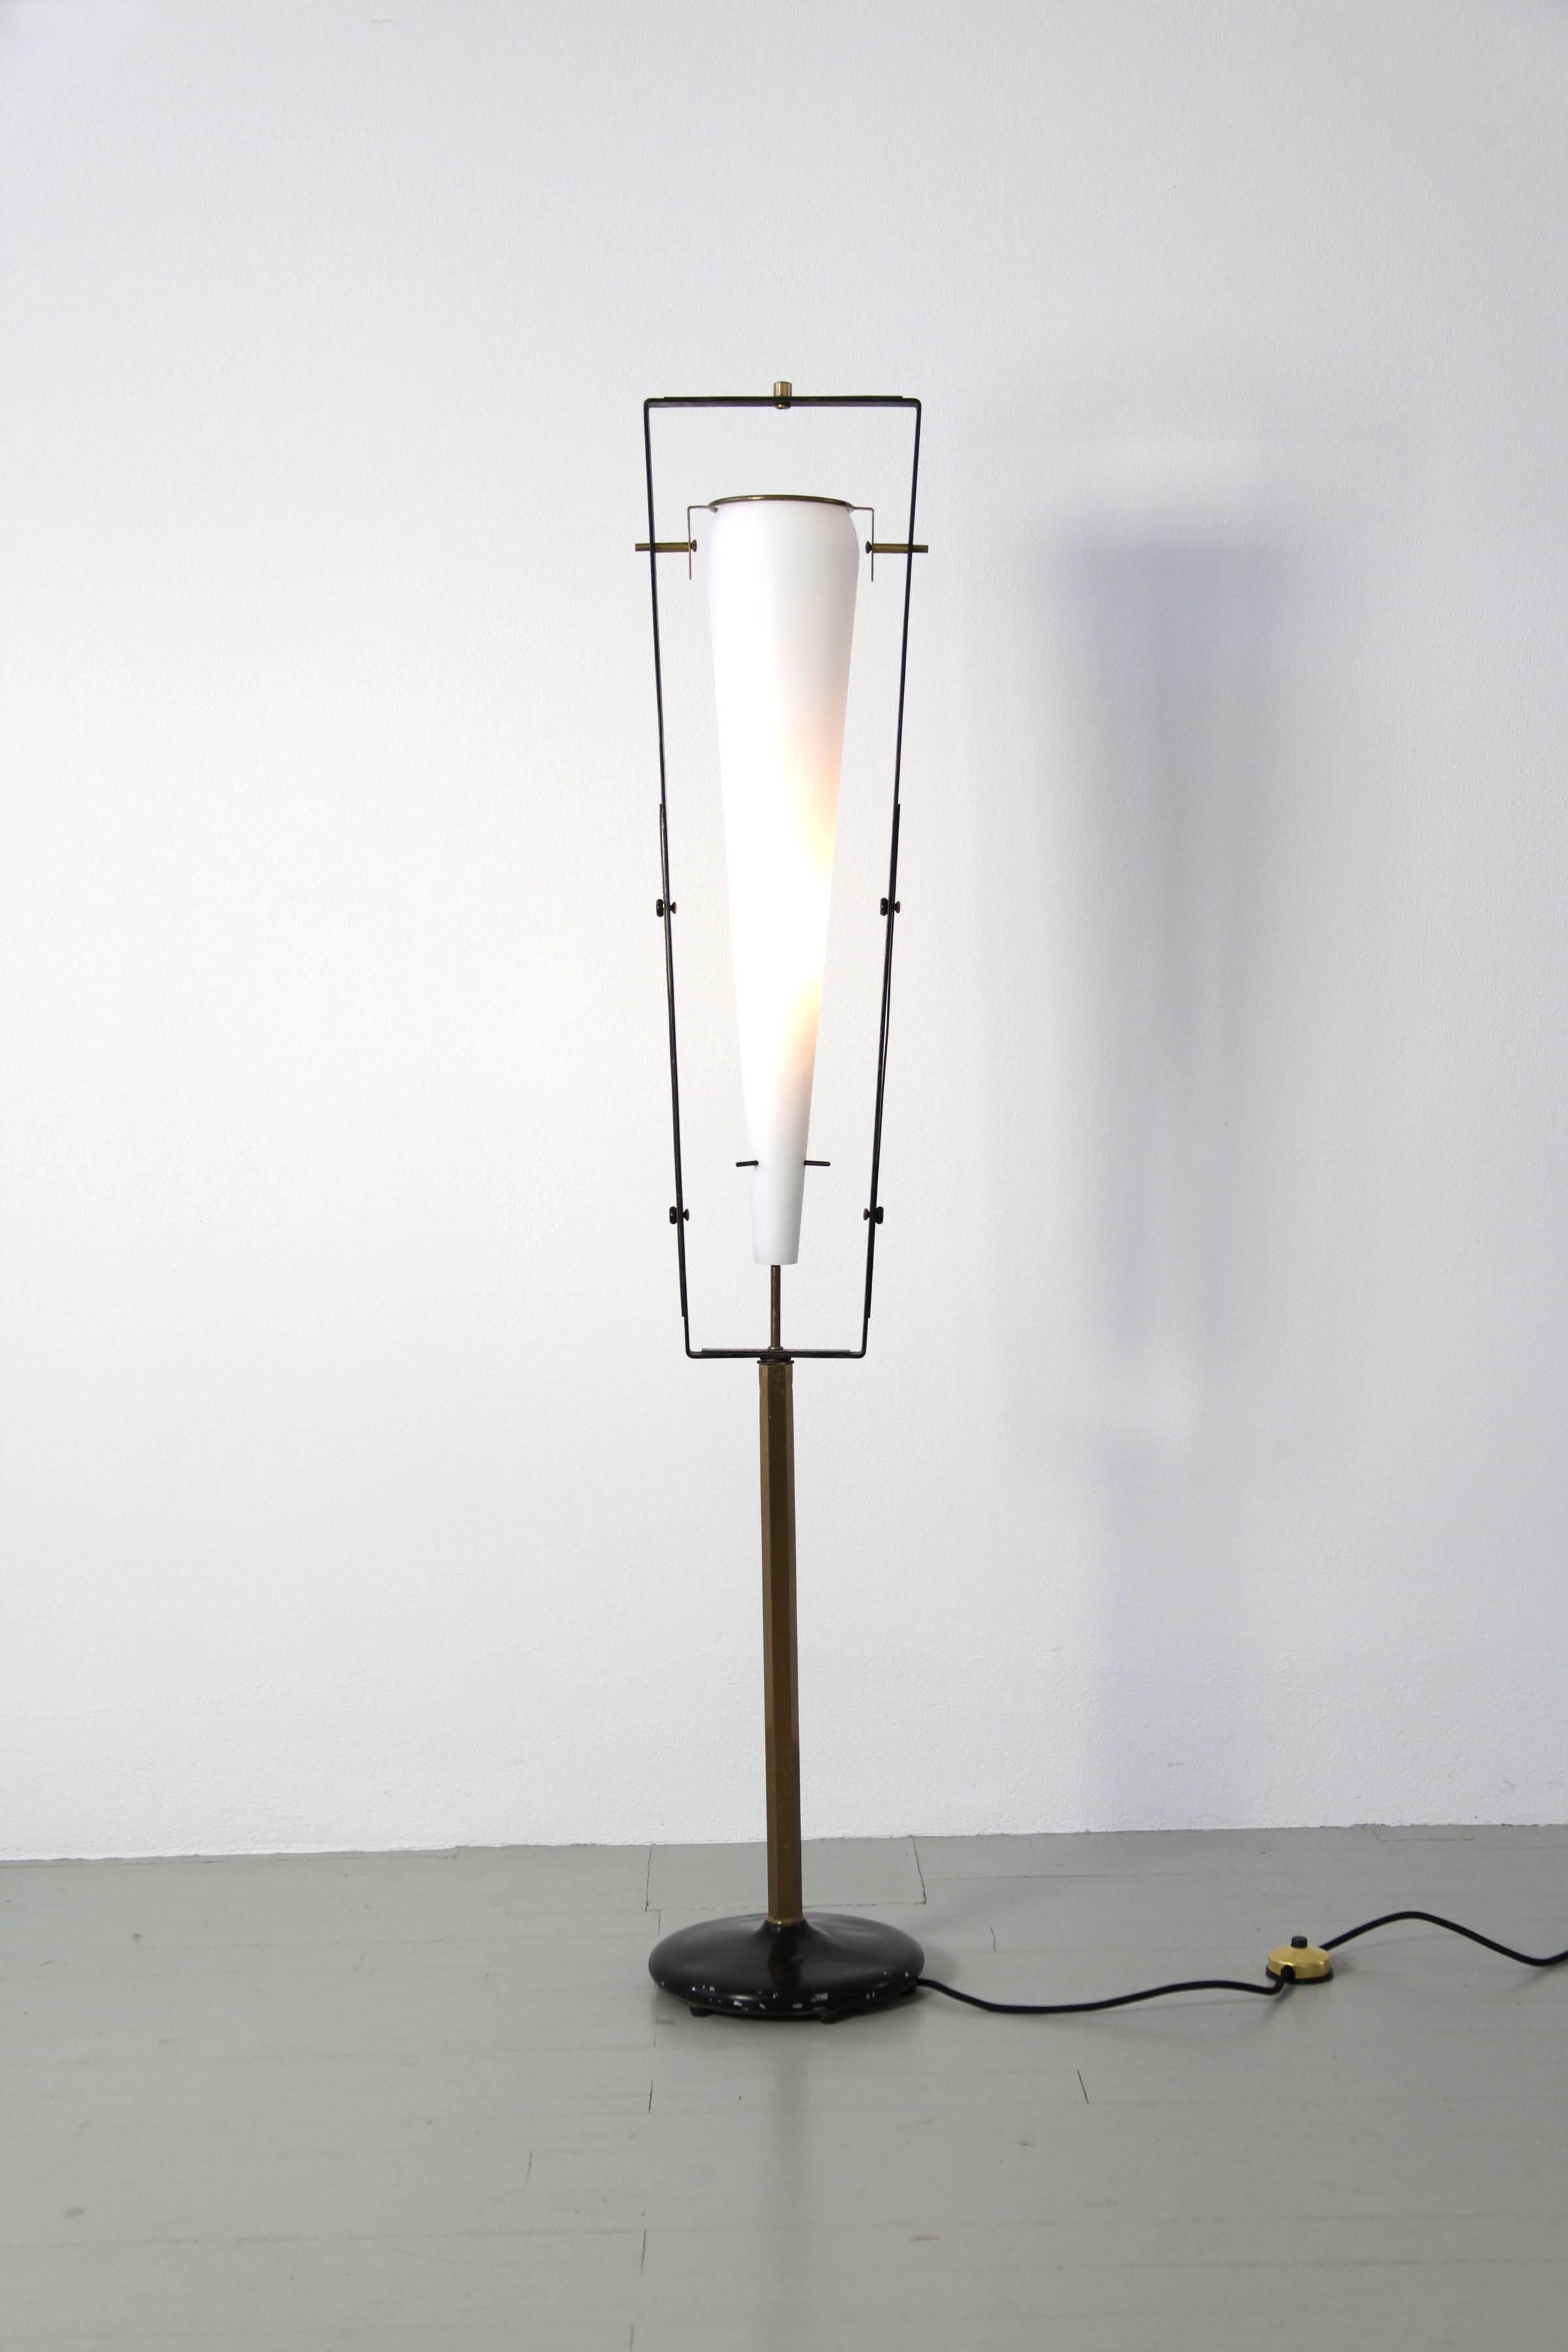 Floor Lamp - Design by Gilardi & Barzaghi, Italy, 1950s. The floor lamp has a large satinated glass shade, which rests in a framework of brass.

Feel free to contact us for more detailed pictures.